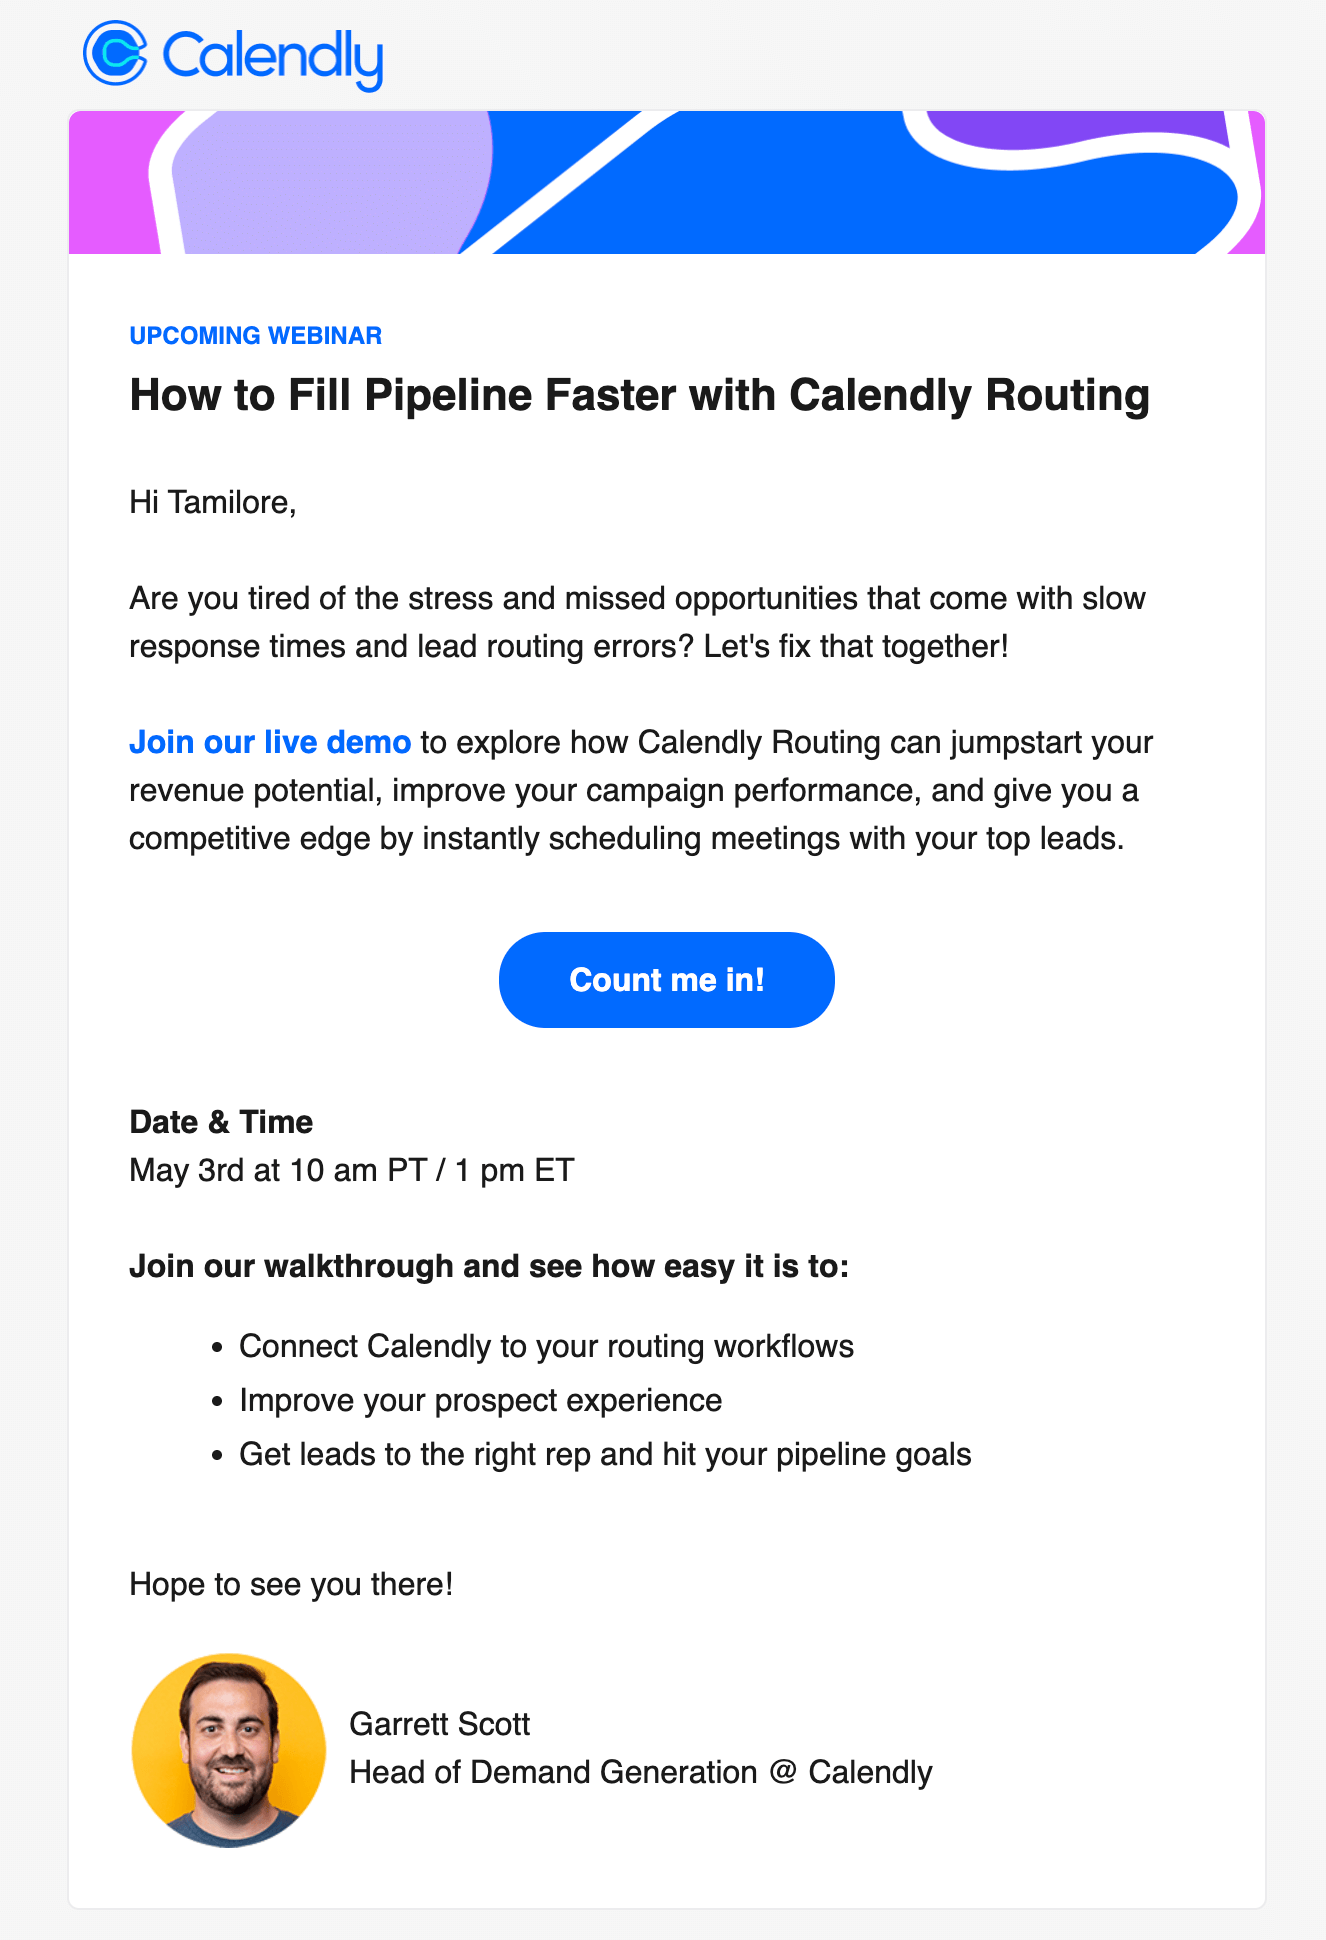 Email Engagement Content Ideas: Screenshot of Calendly's email urging users to sign up for their webinar